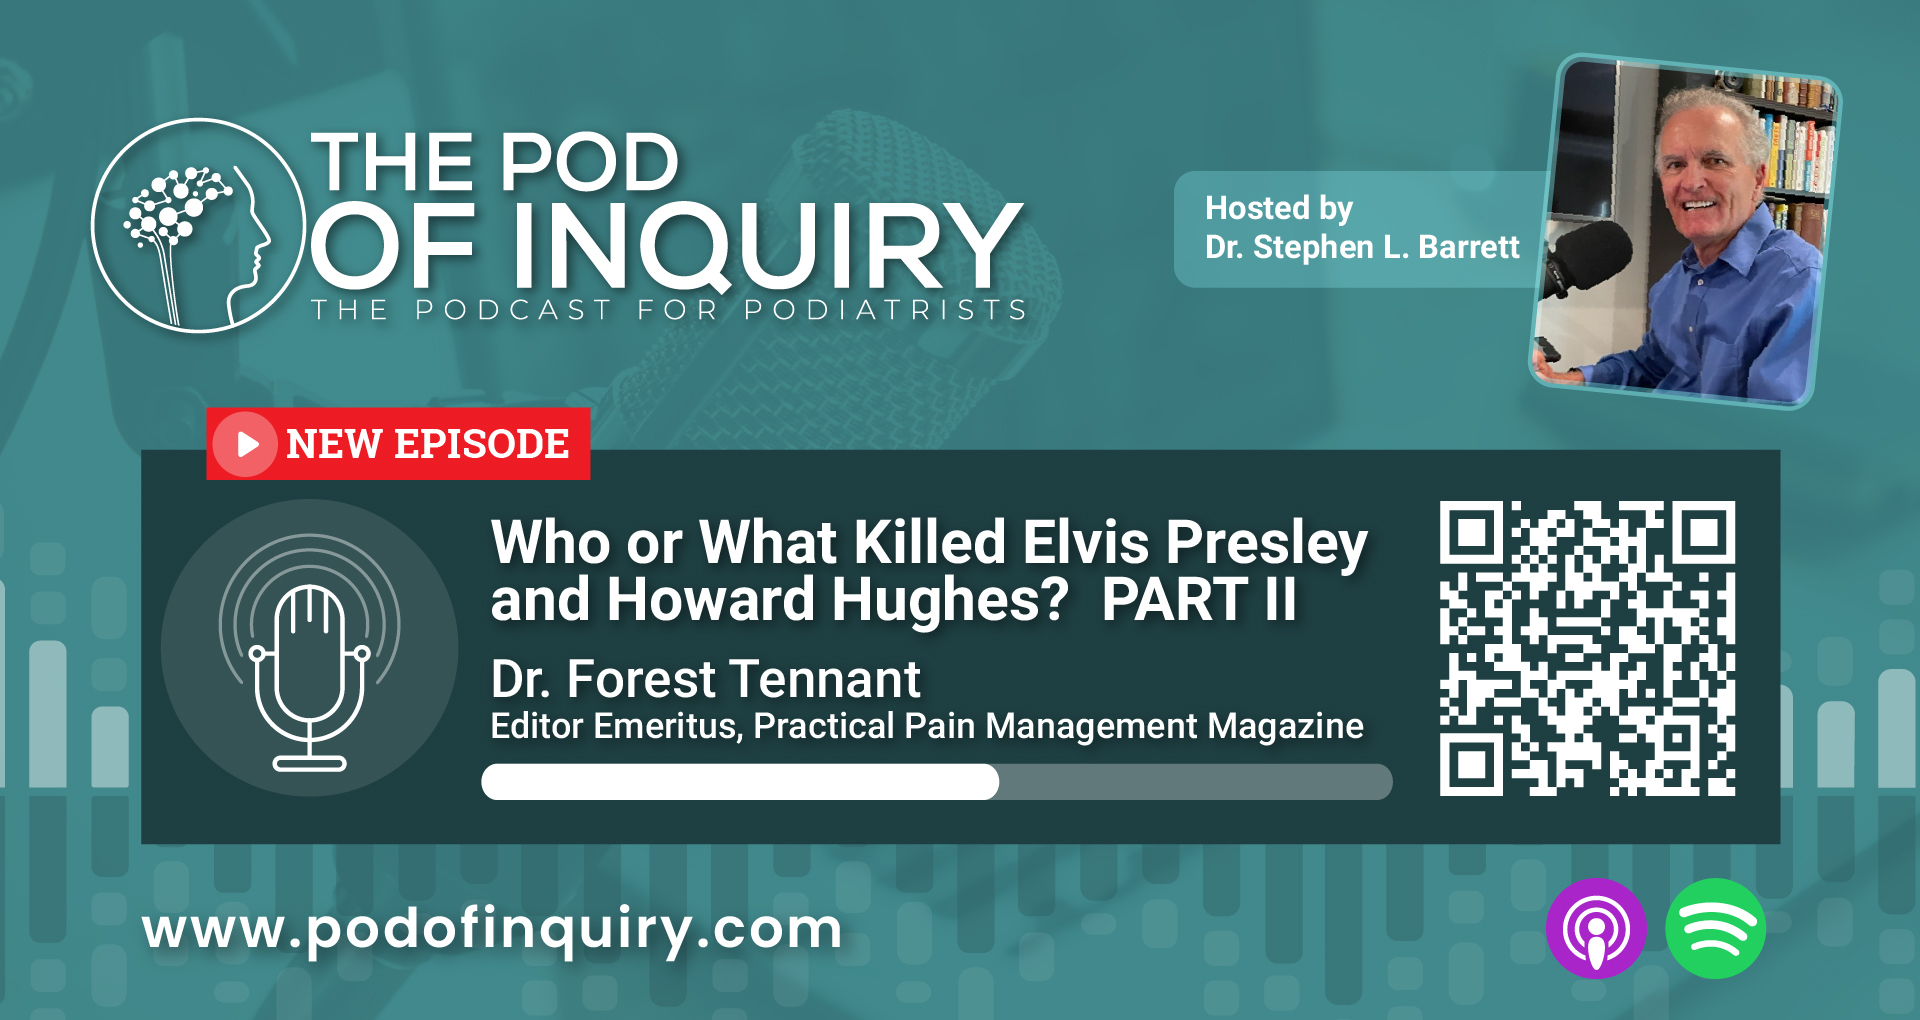 Who or What Killed Elvis Presley and Howard Hughes?